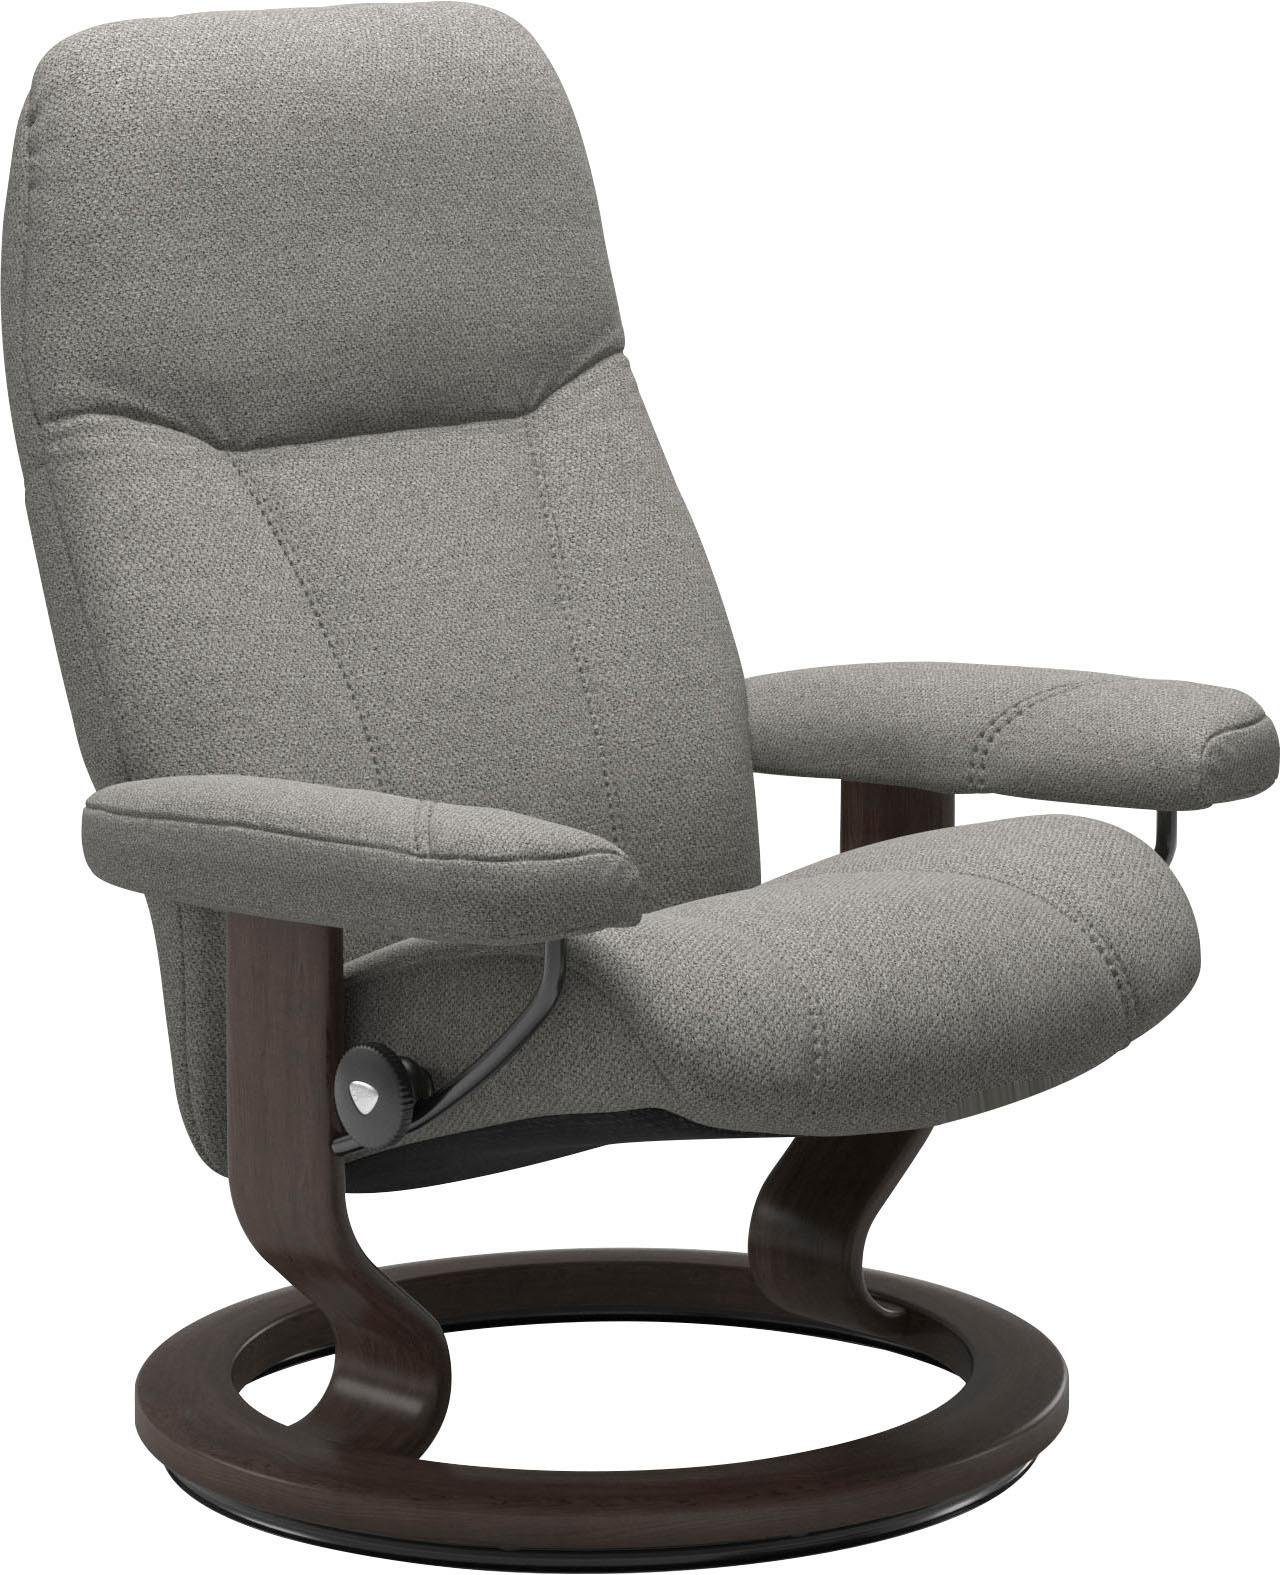 Relaxsessel Classic Größe M, Gestell Stressless® Wenge Base, Consul, mit